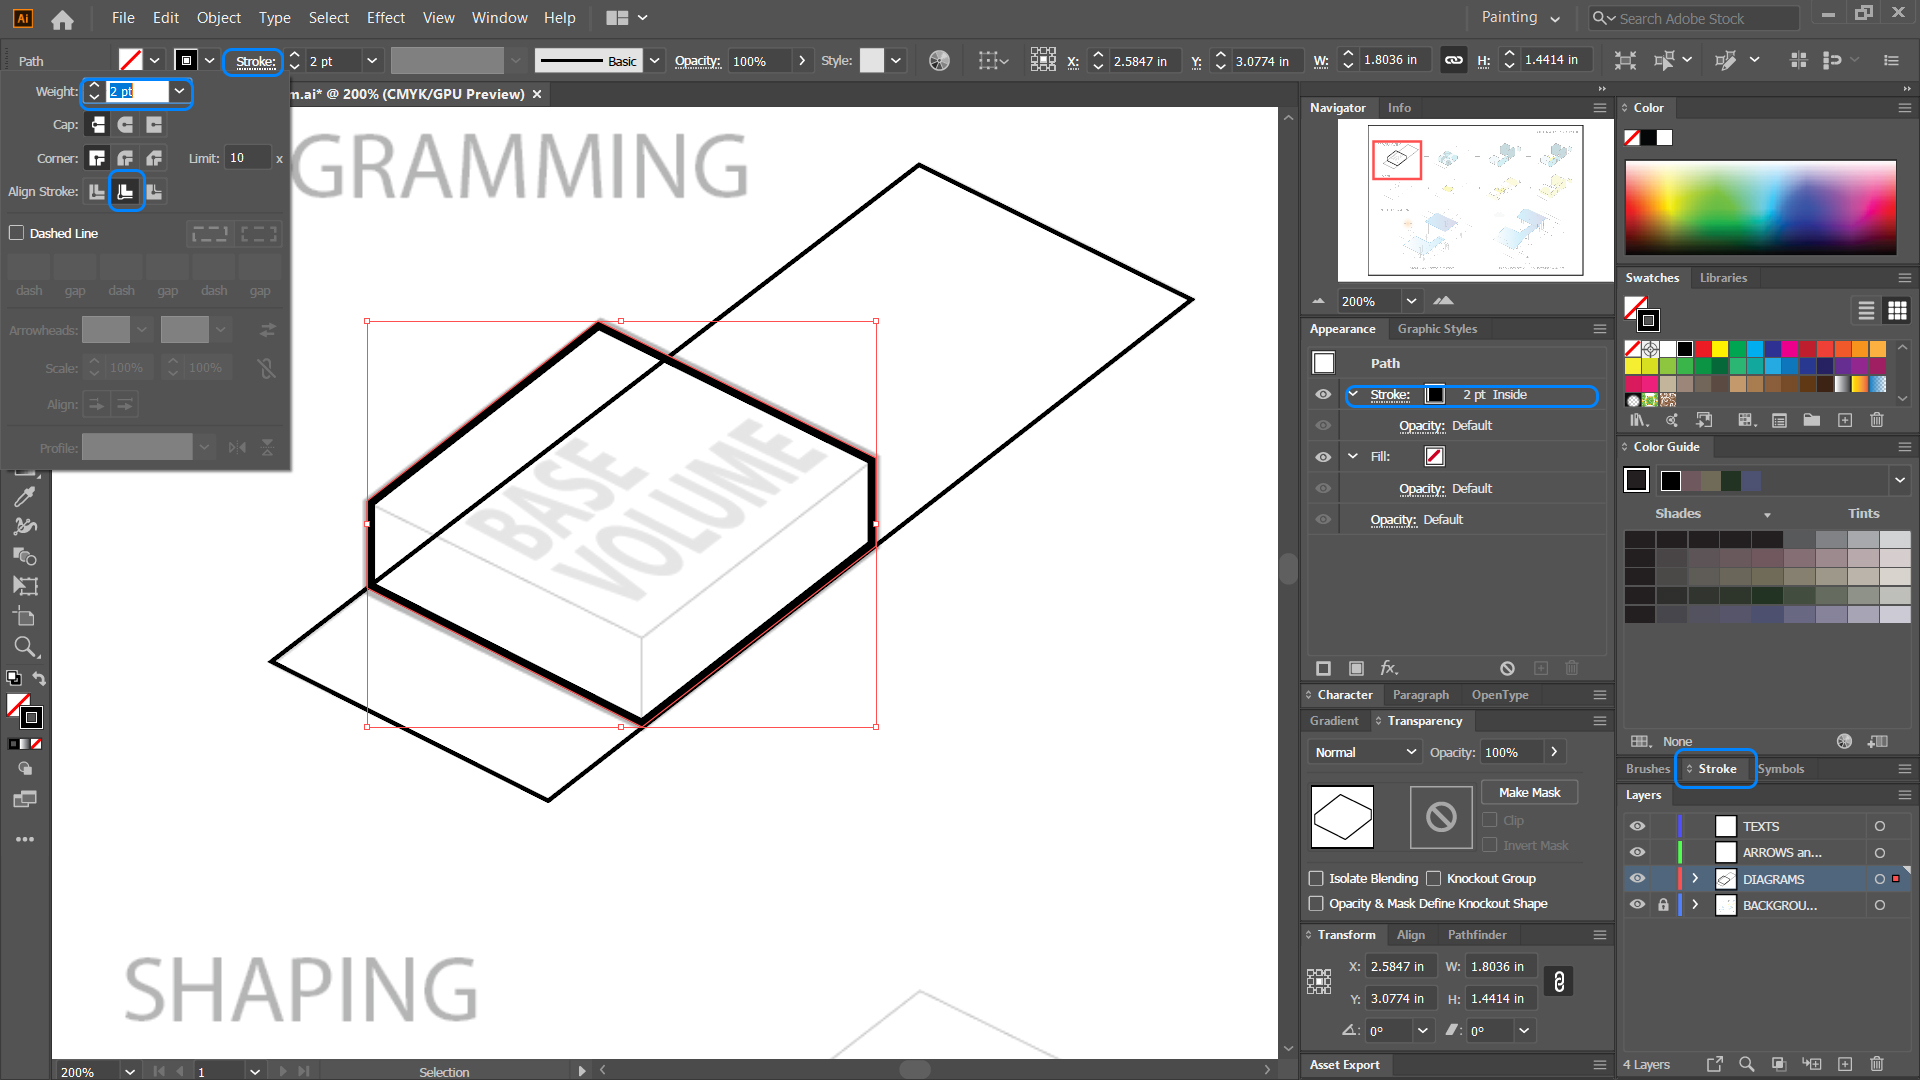 It indicates how to use the pen tool to draw the building outline.